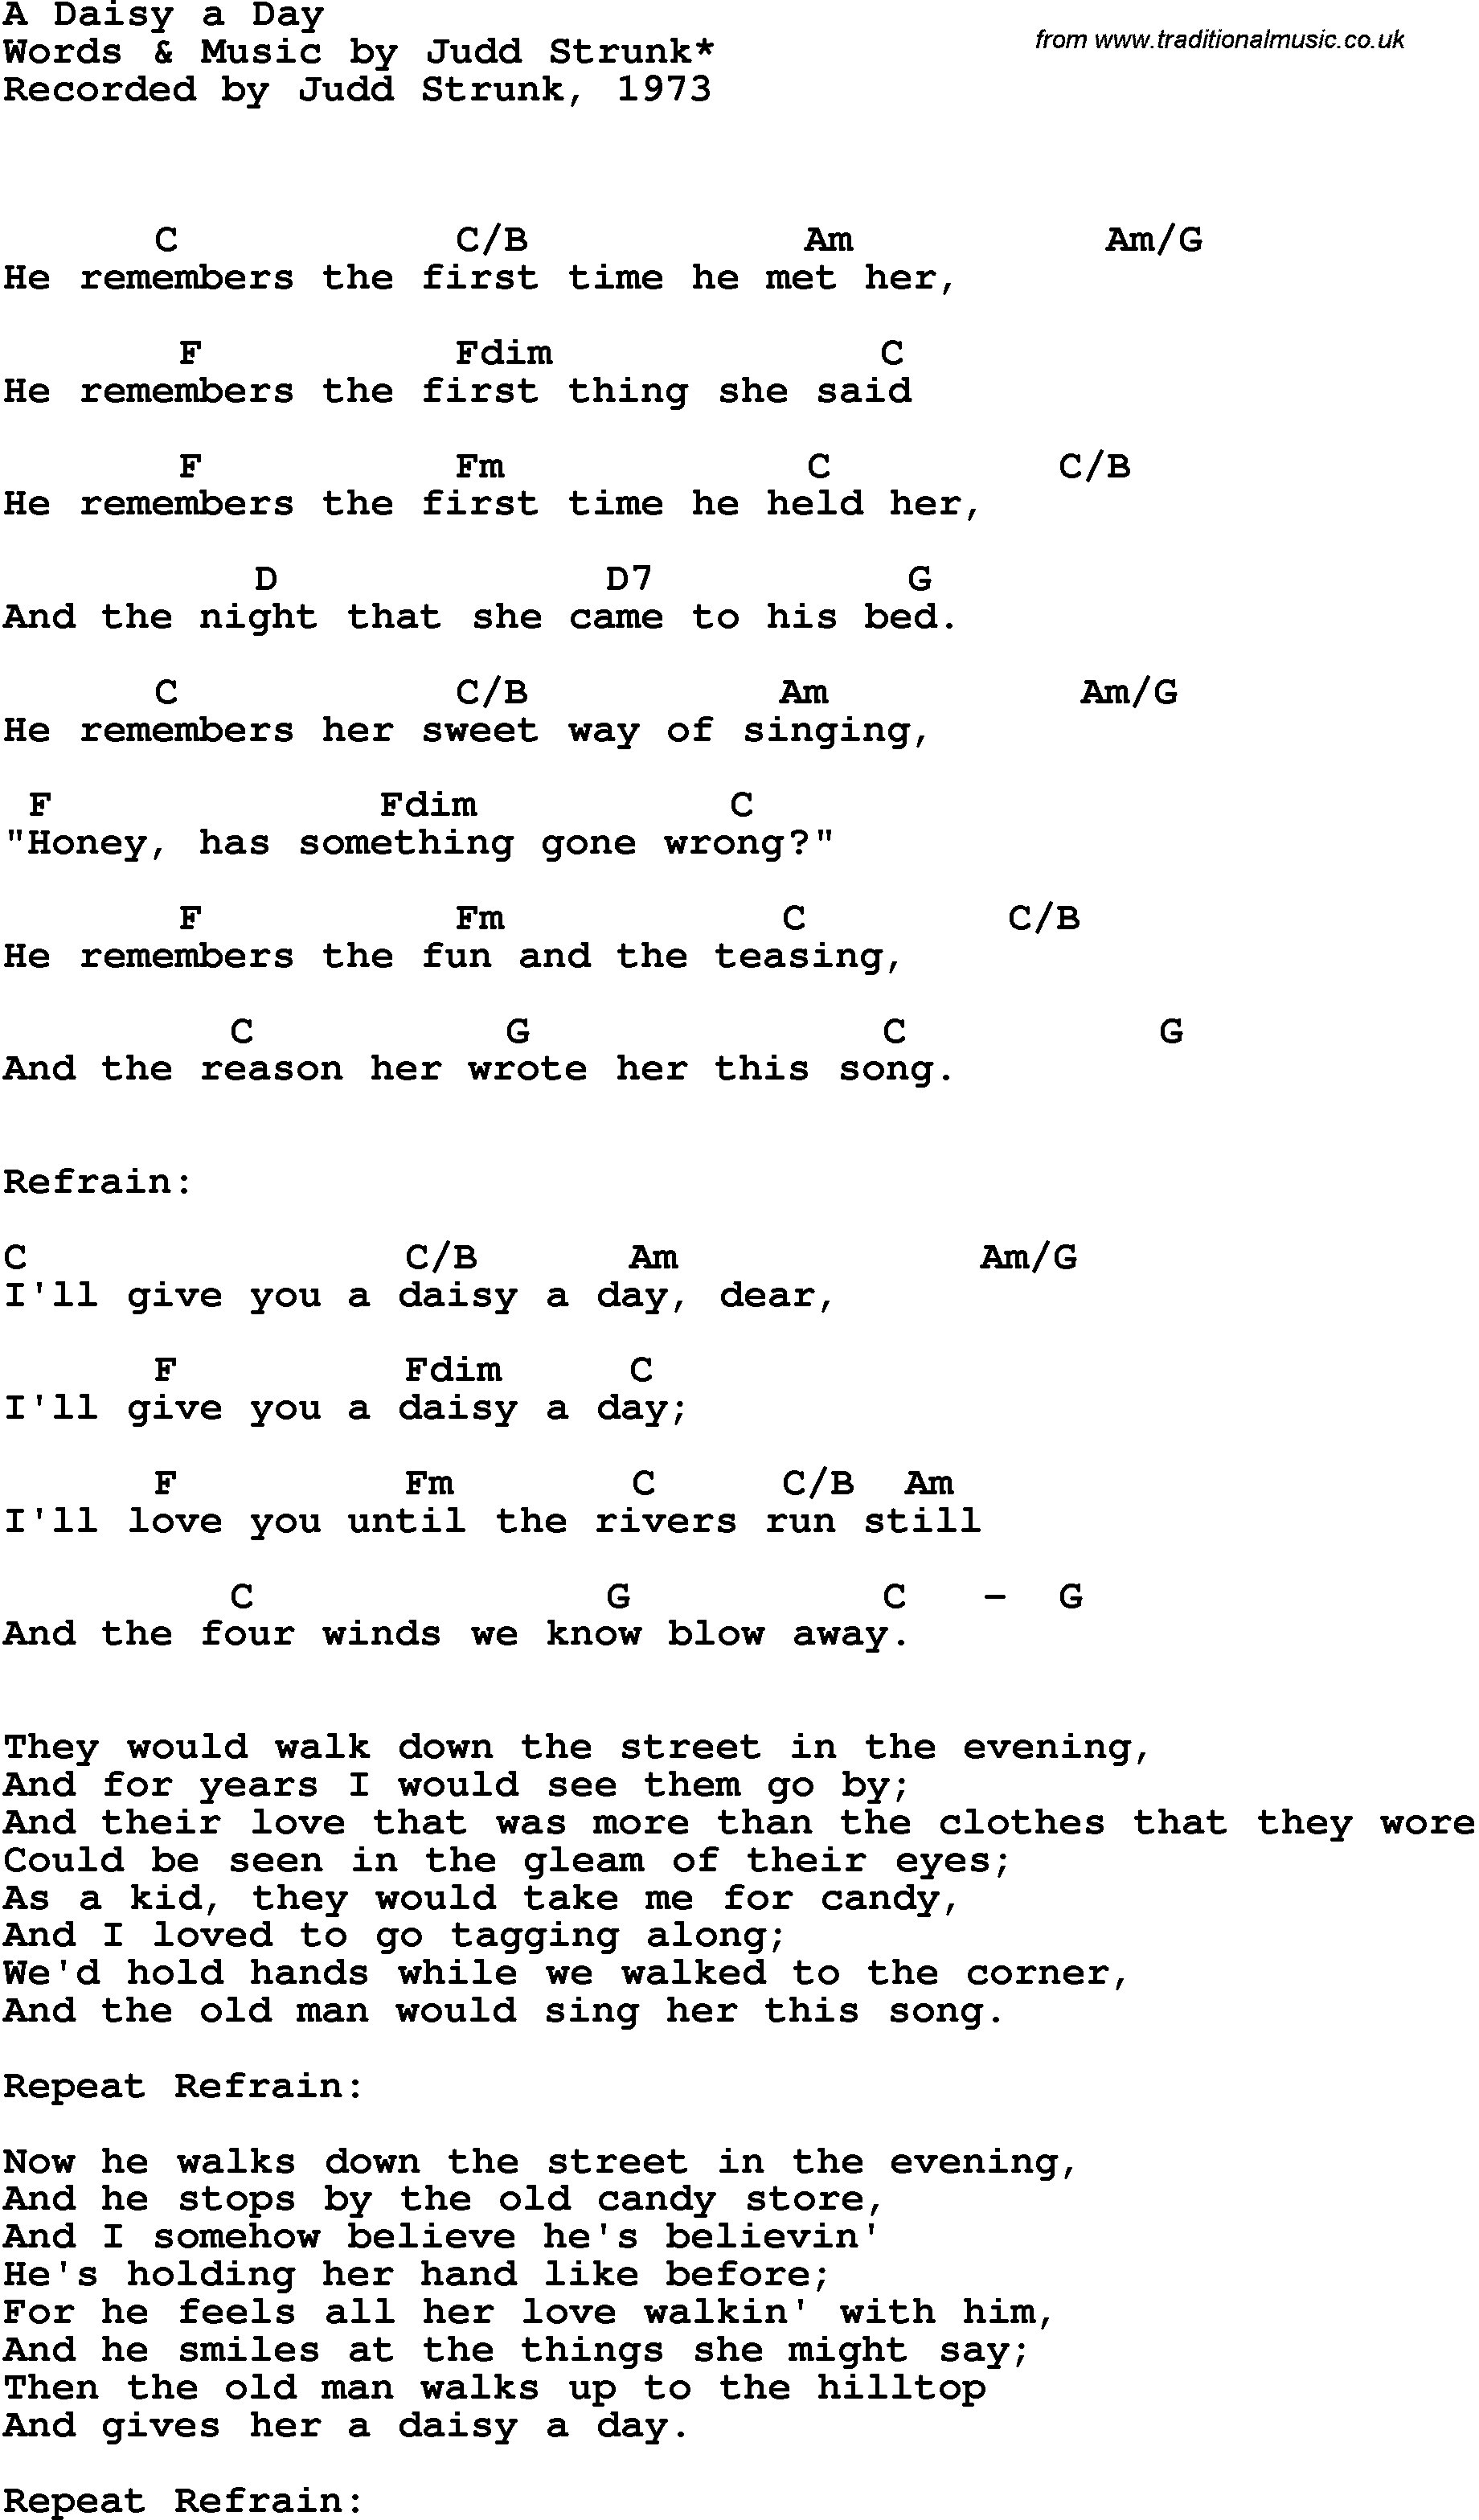 Song Lyrics with guitar chords for A Daisy A Day - Judd Strunk, 1973